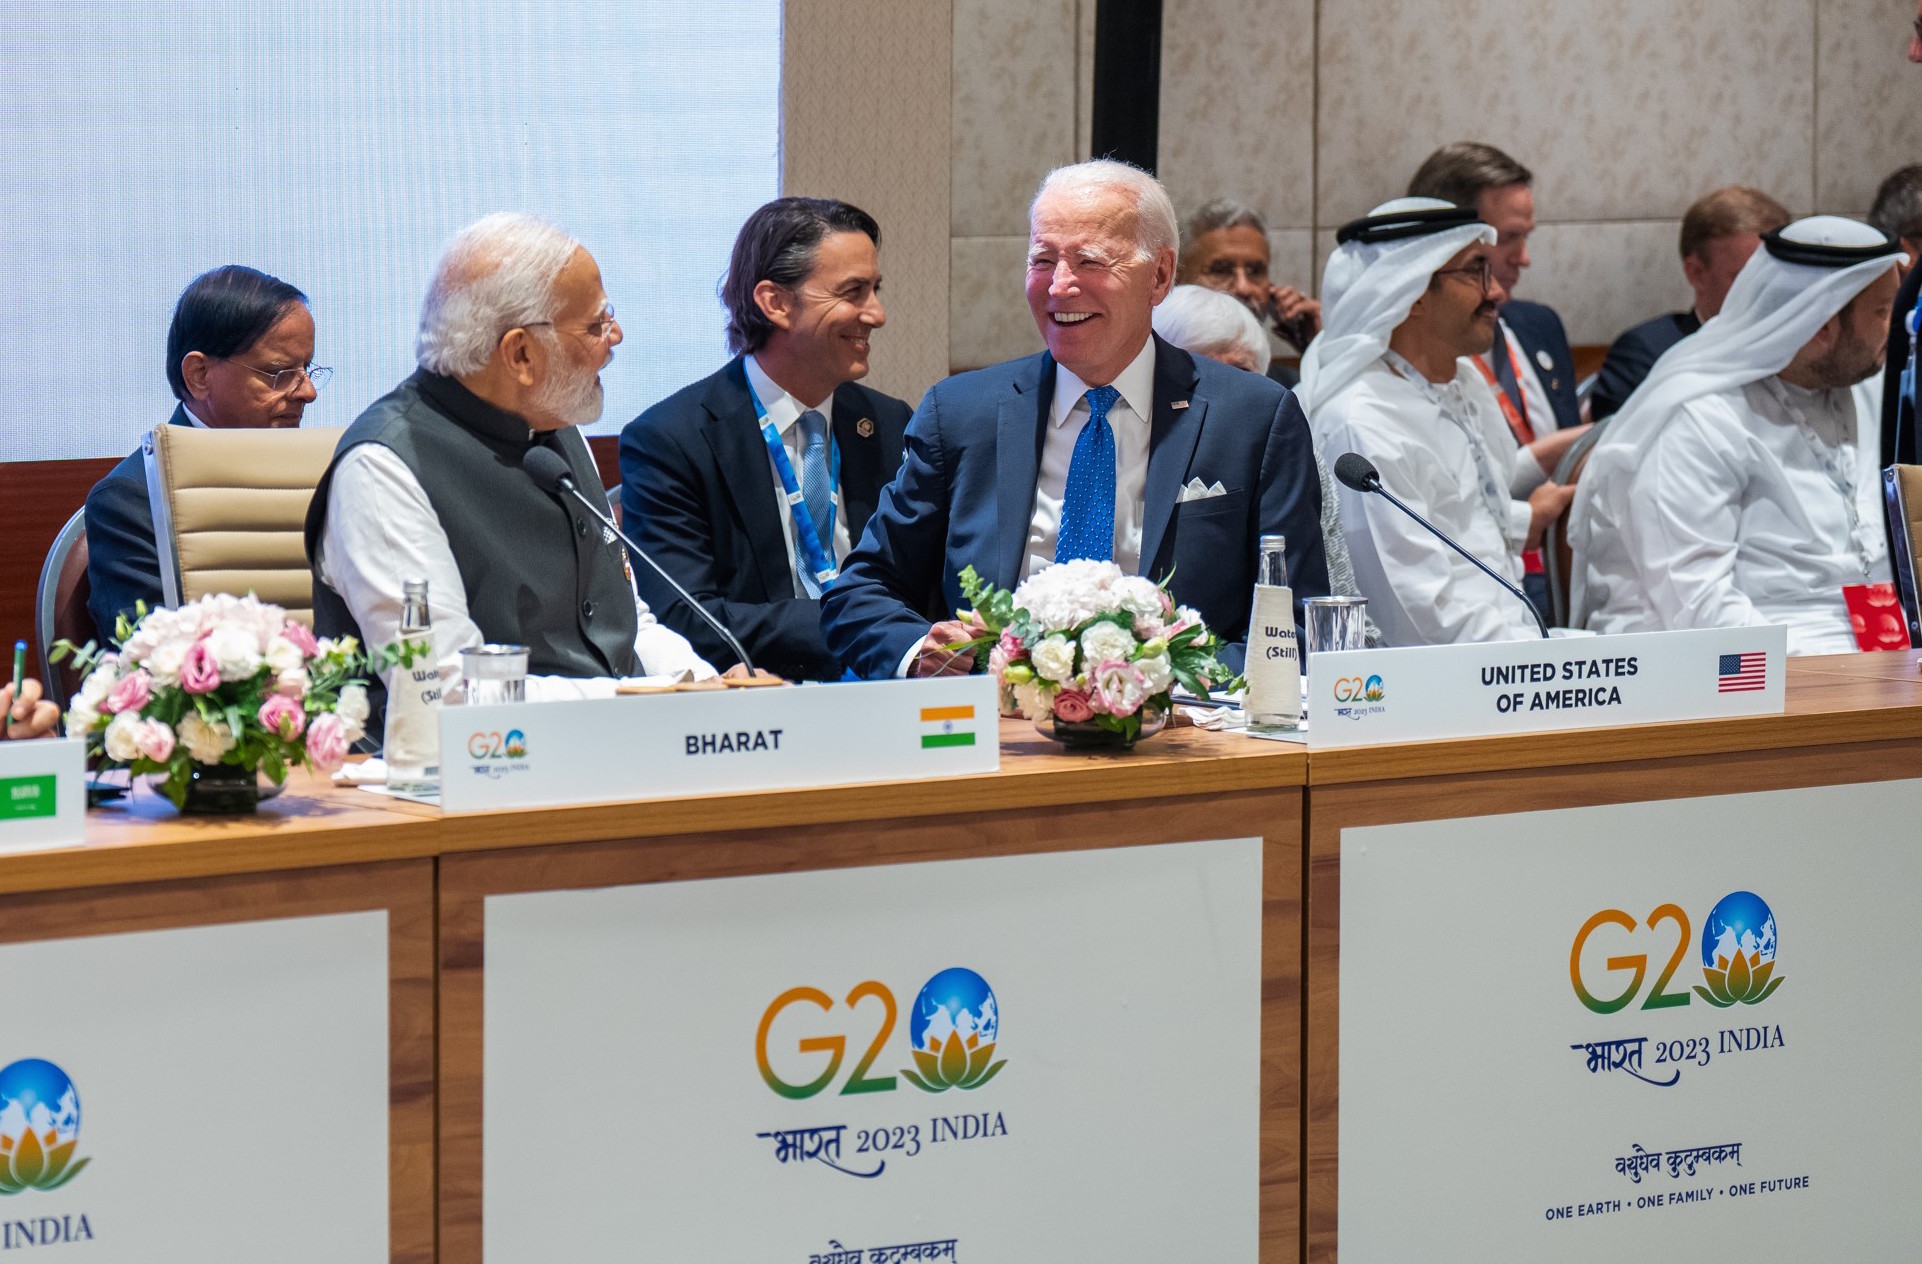 Tourism drives Sustainable Development Goals: G20 Leaders